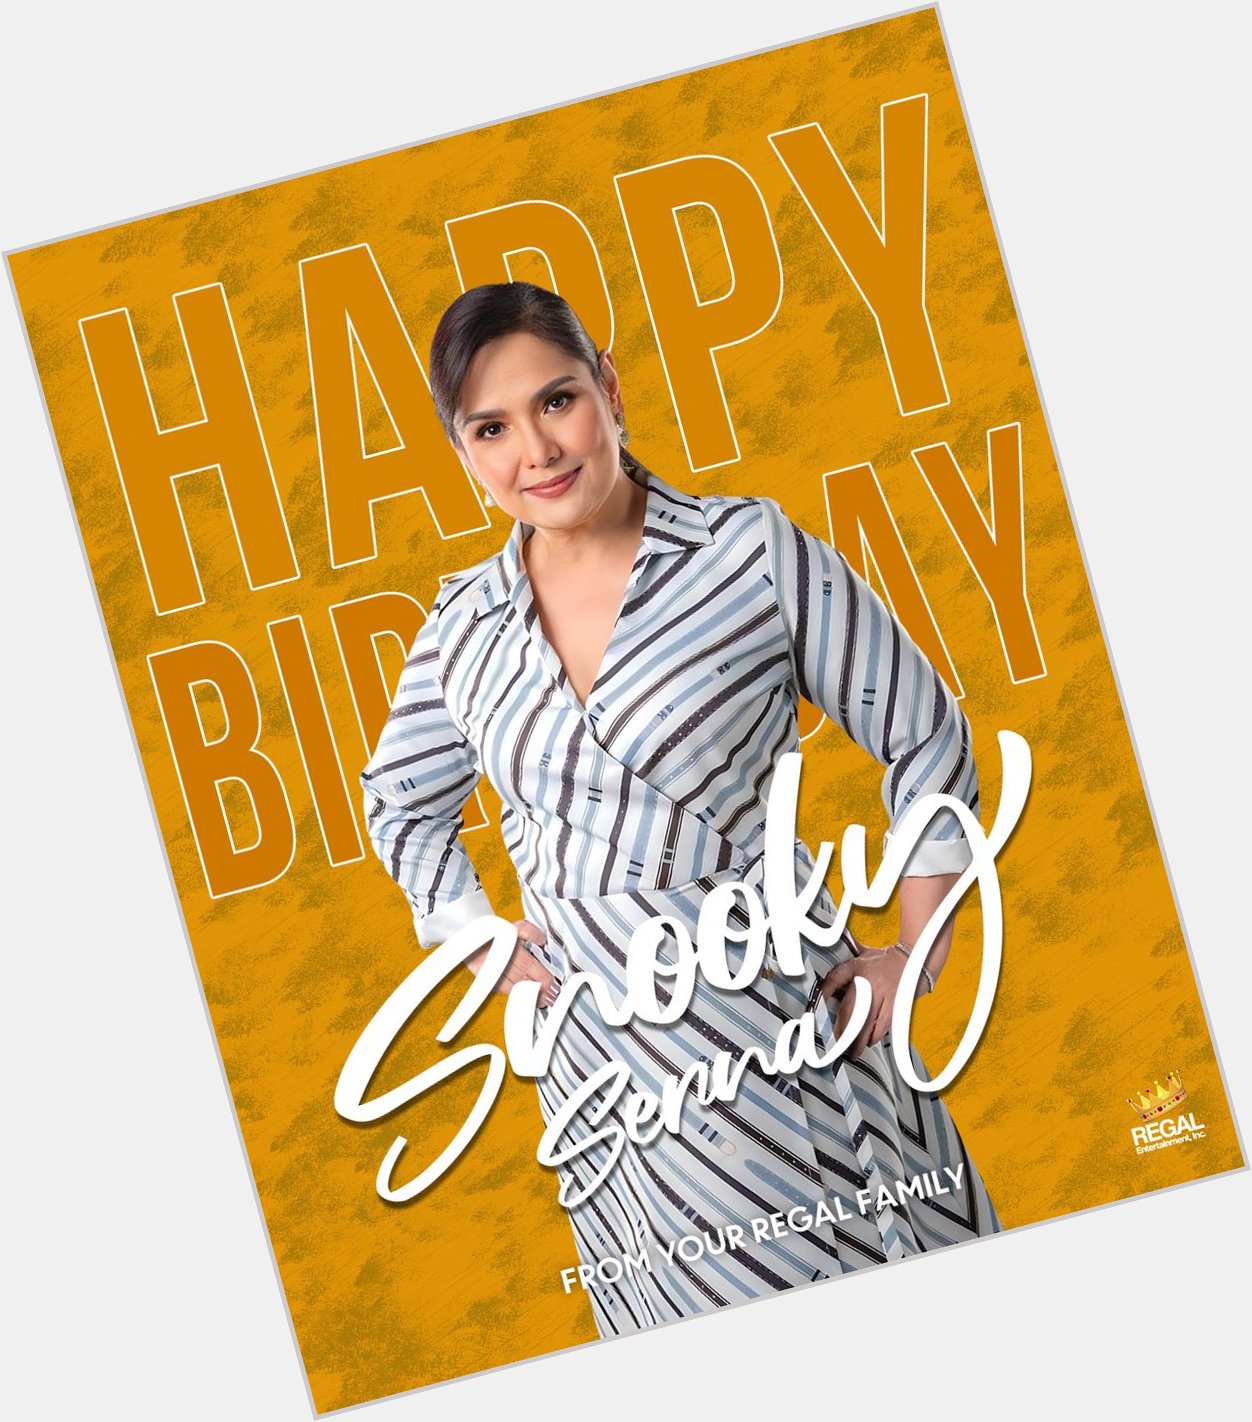 Happy Birthday, Snooky Serna!  We wish you all the best in life! From your Regal Family! 